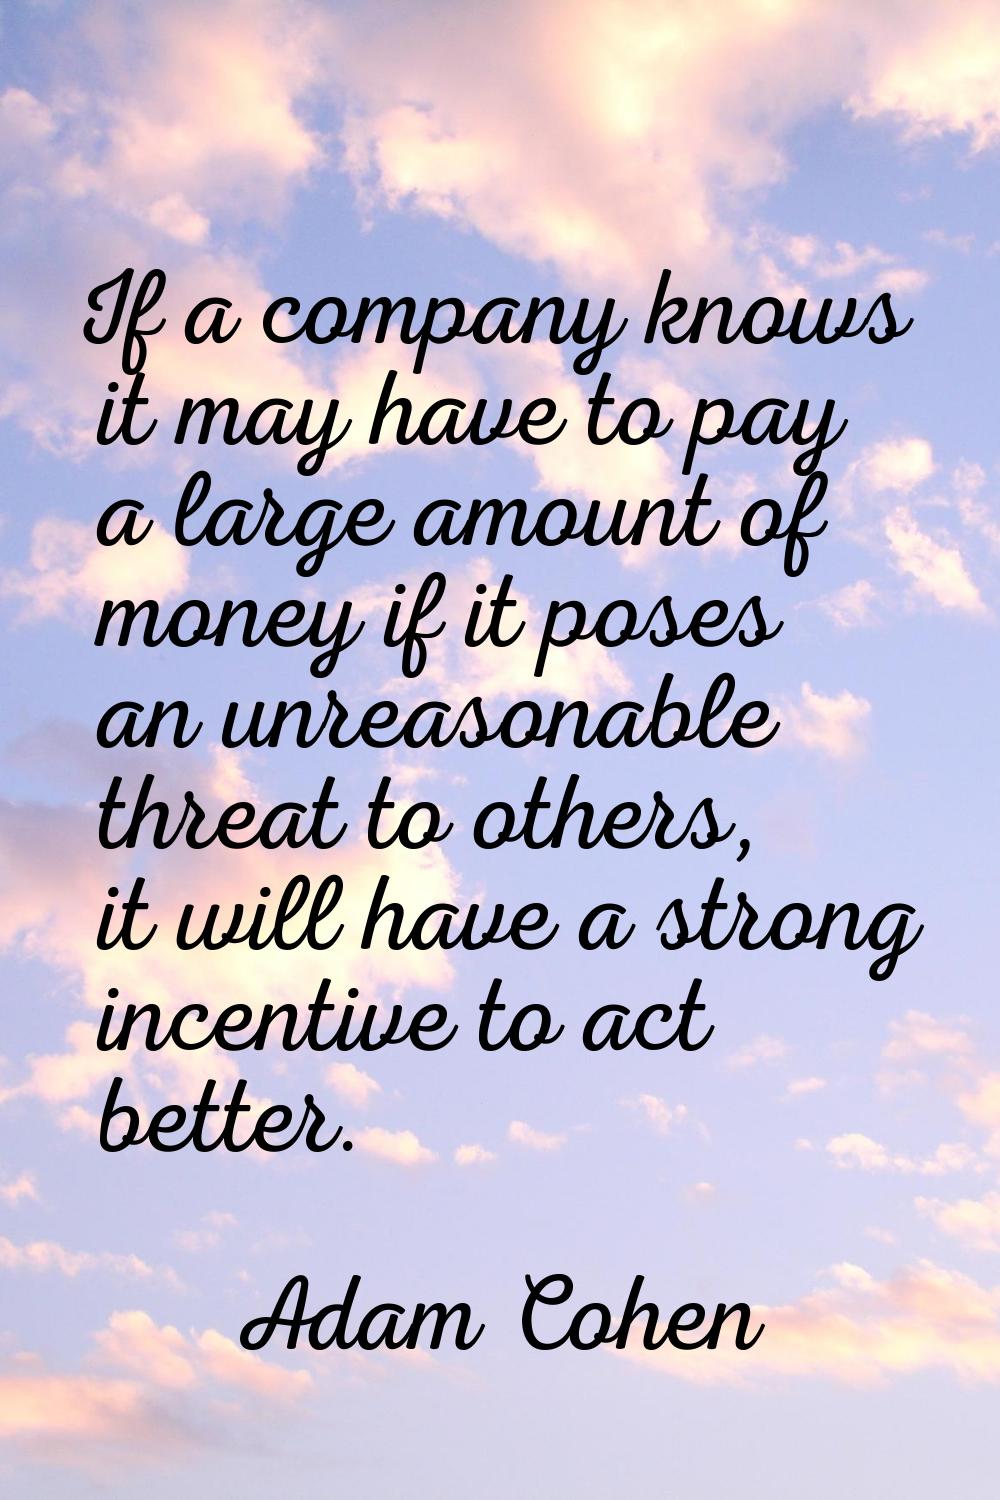 If a company knows it may have to pay a large amount of money if it poses an unreasonable threat to